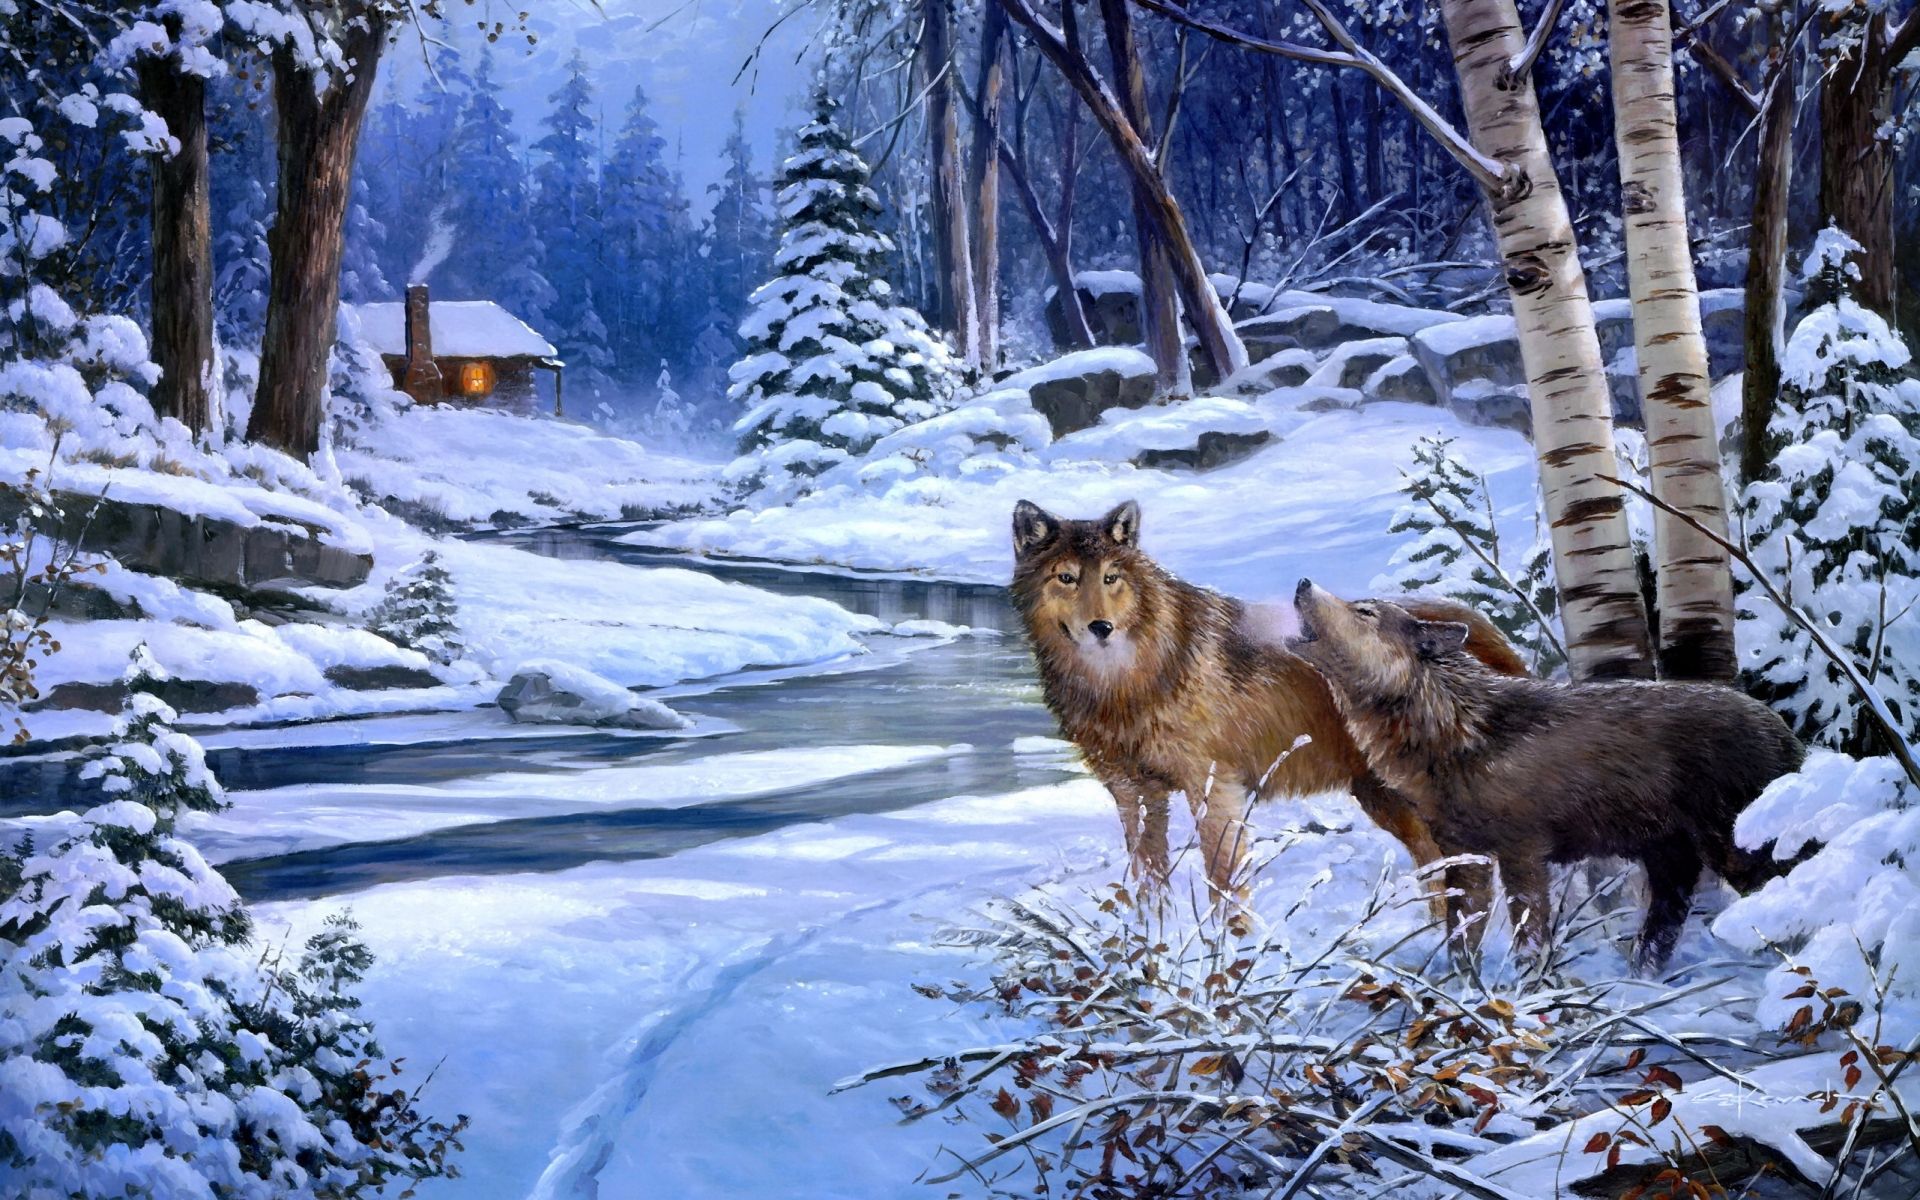 Wolves wolf art paintings landscapes winter snow rivers cabin houses rustic trees forest woods wallpaperx1200